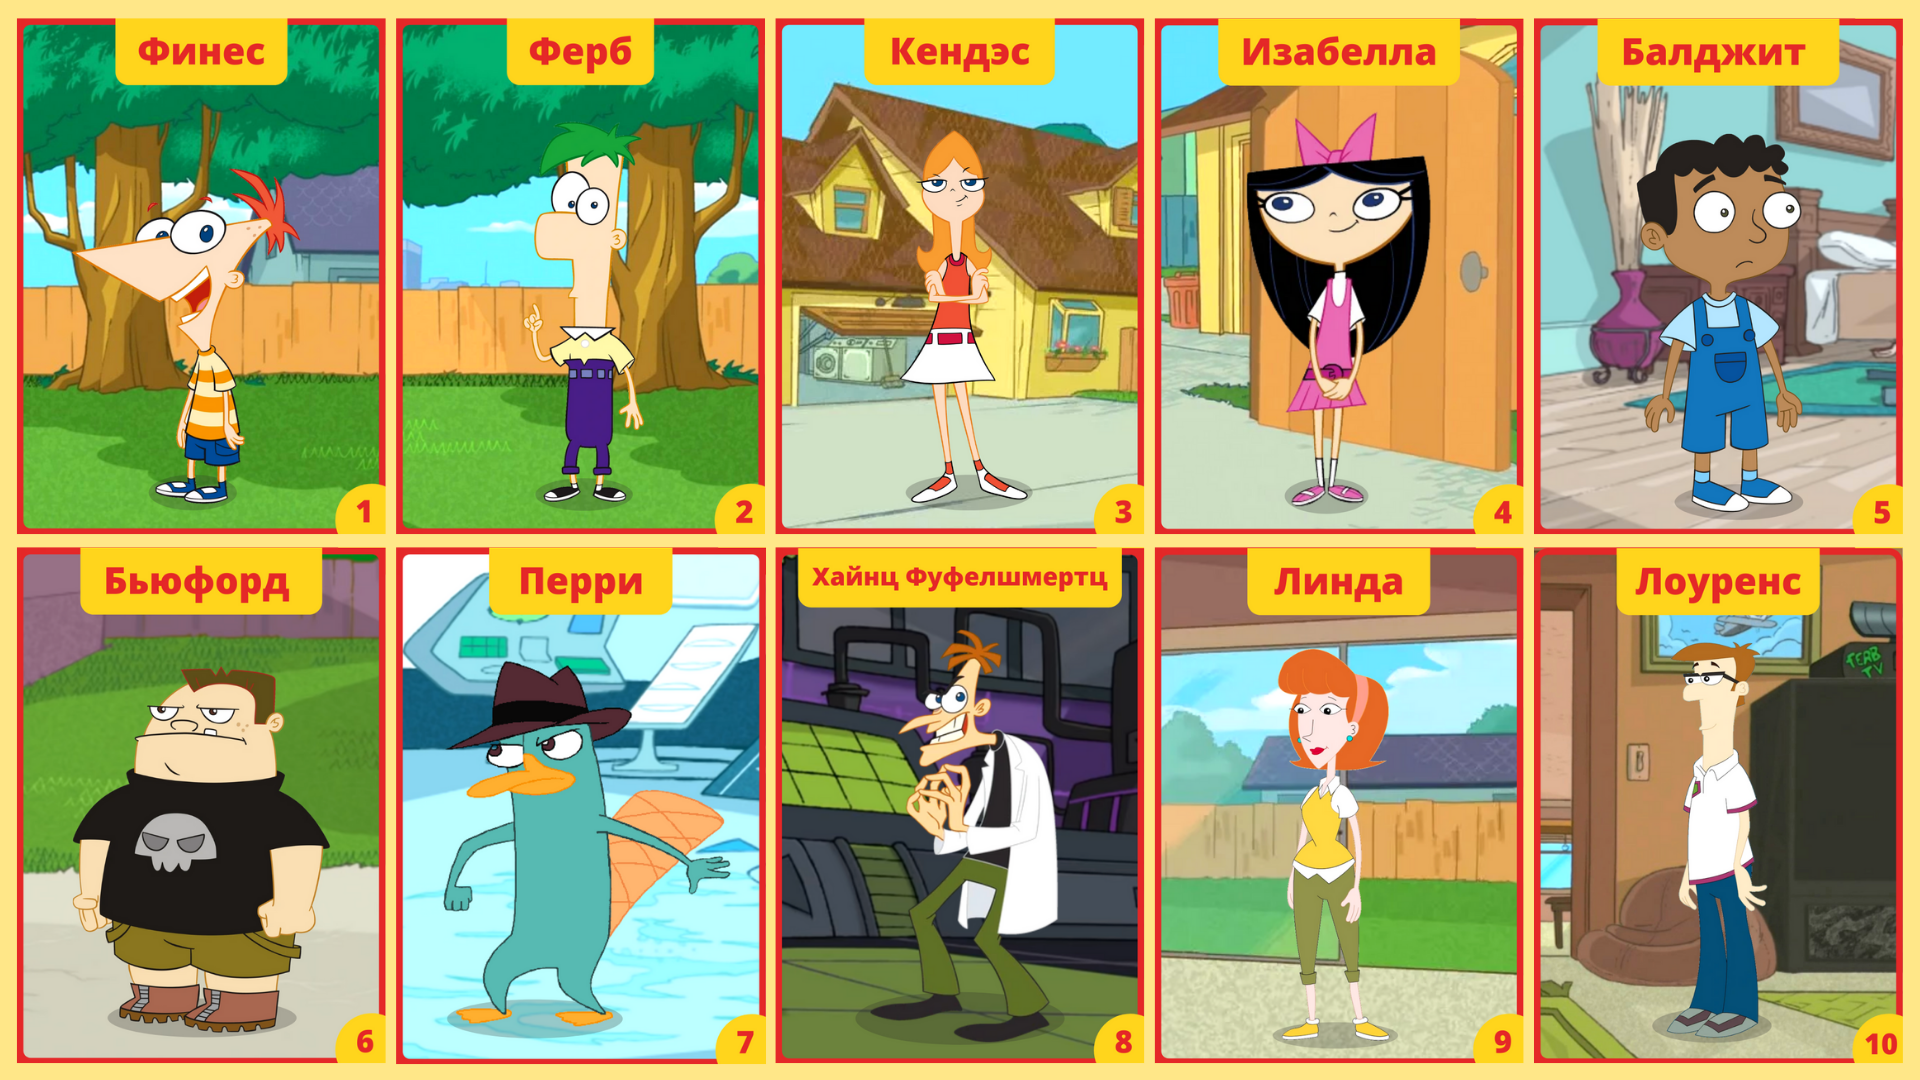 Phineas and Ferb cards 